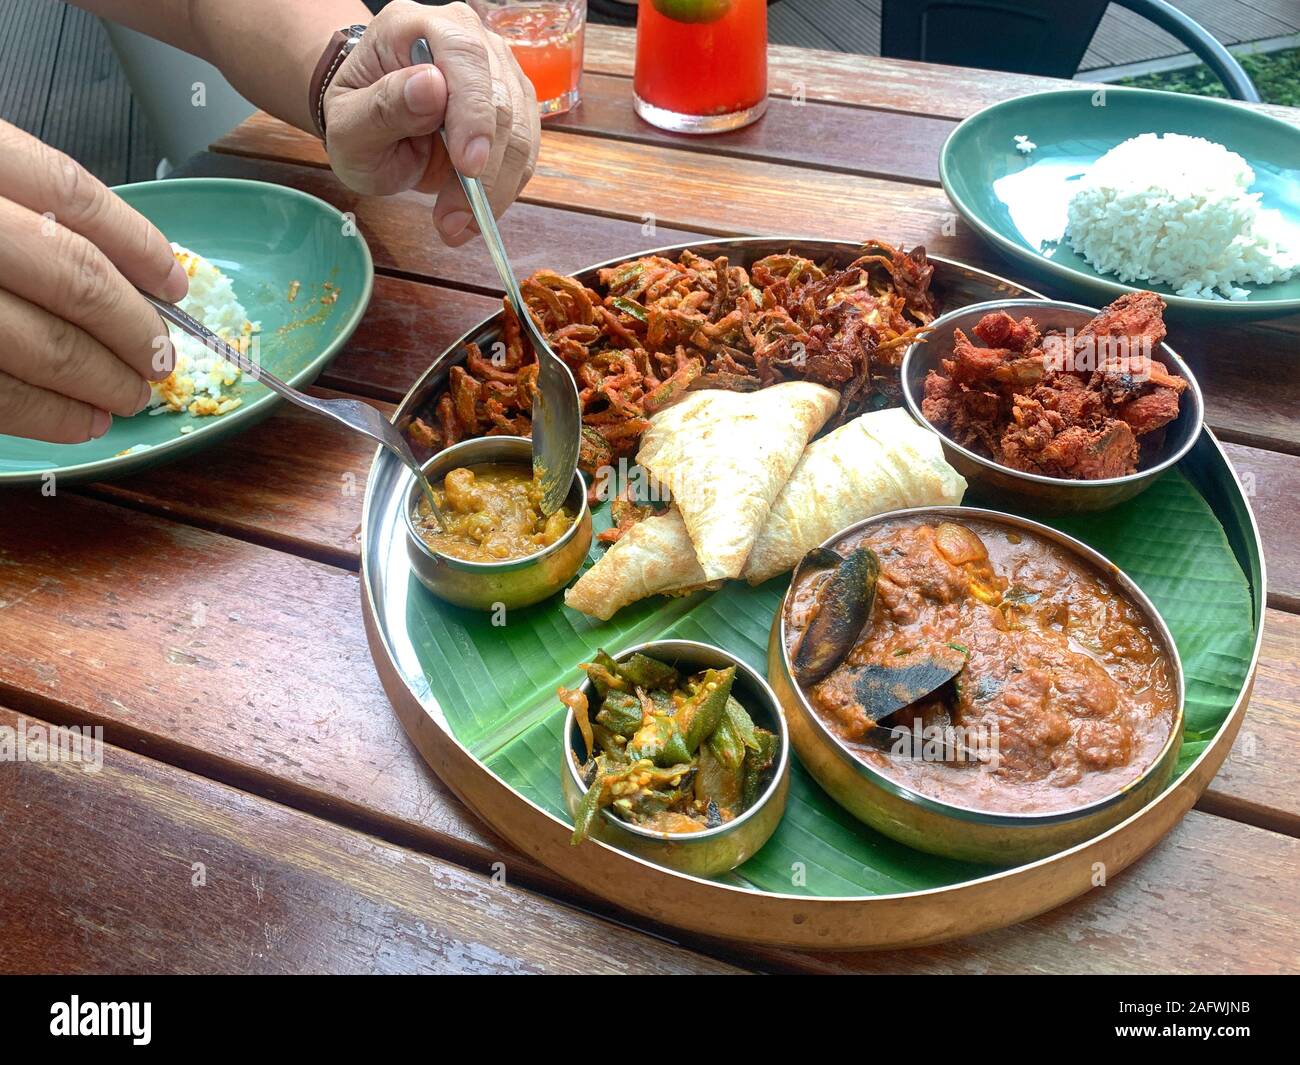 Man using fork and spoon to eat banana leaf dish, consists of fried chicken, curry seafood, lady fingerspotatoes and canai Stock Photo